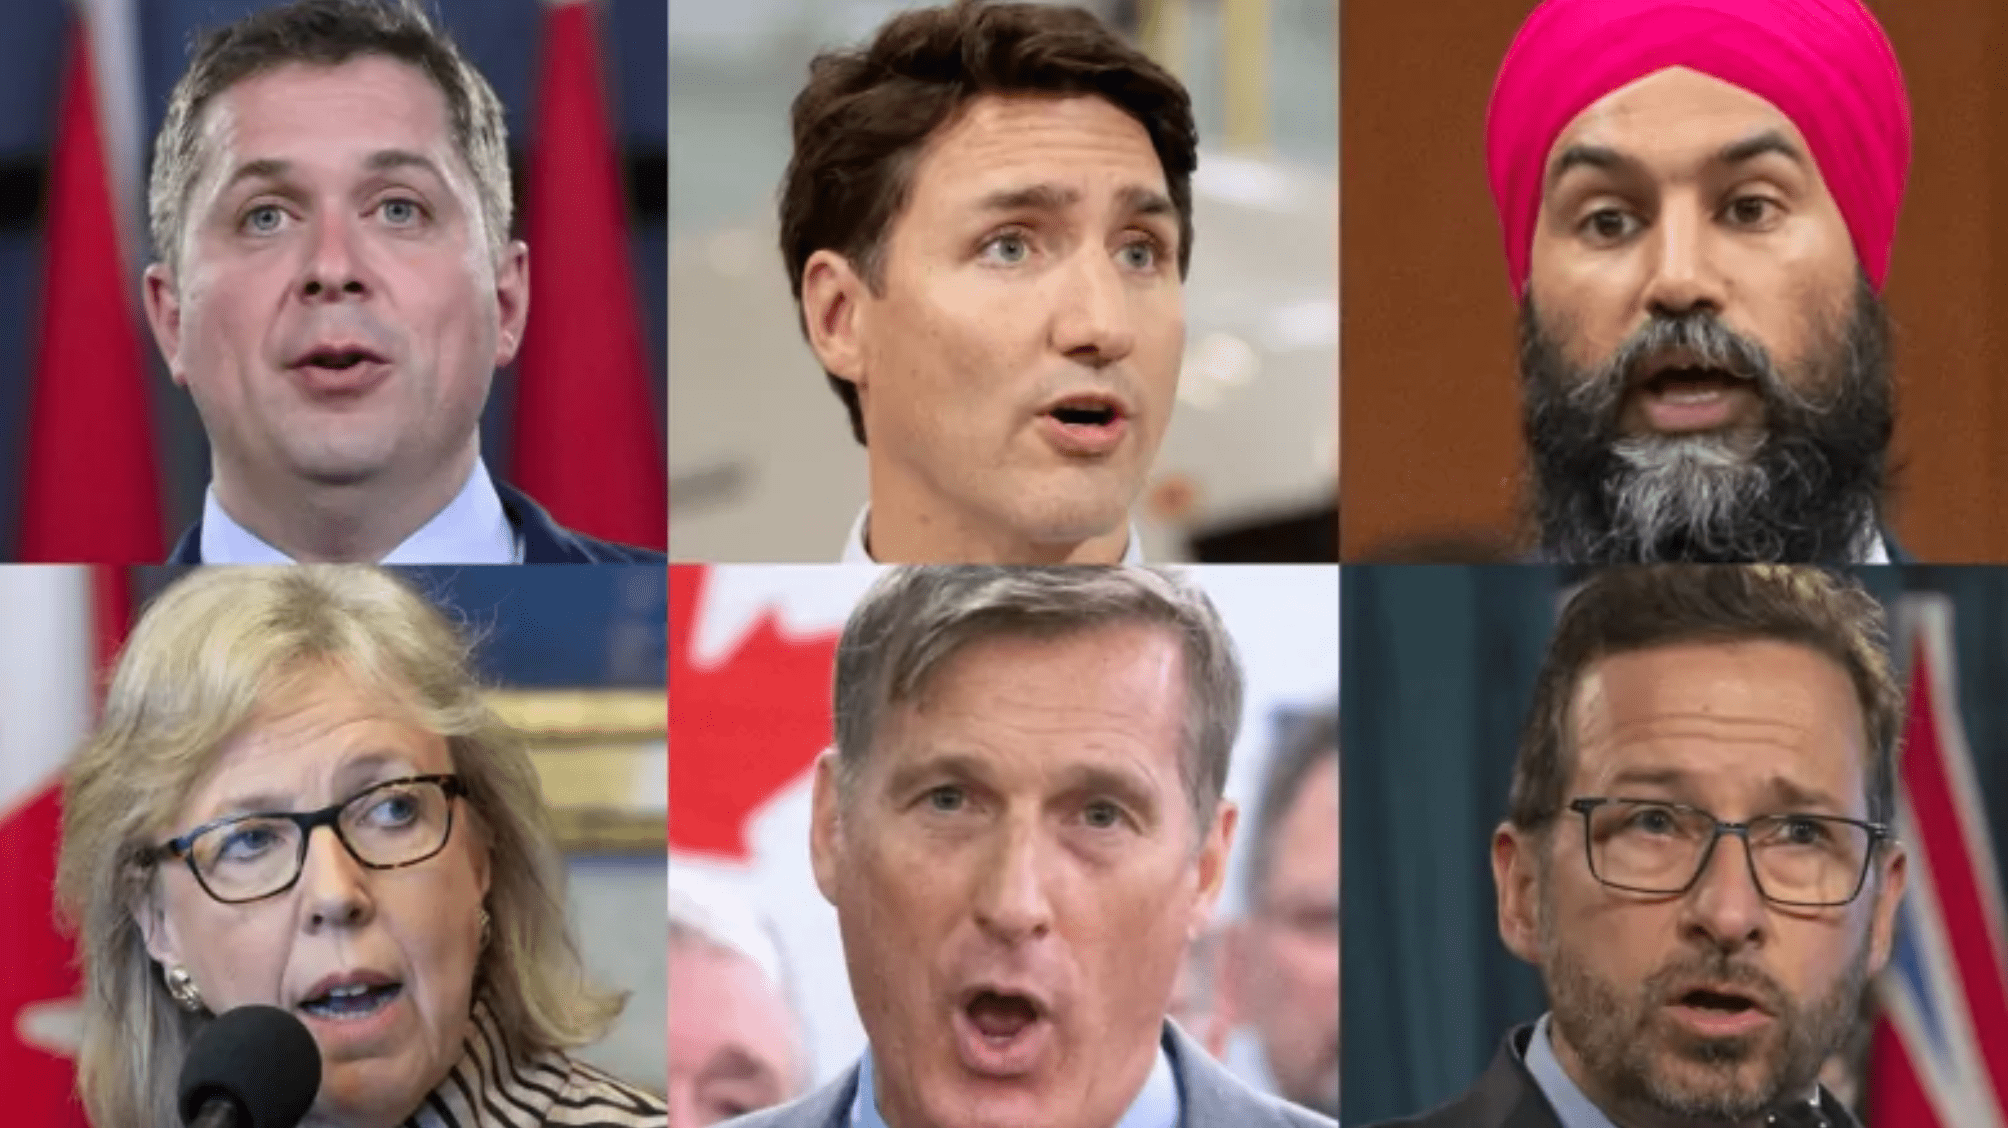 Photo Credit: CBC News, October 7, 2019. Top row, from left: Conservative Party Leader Andrew Scheer, Liberal Party Leader Justin Trudeau, NDP Leader Jagmeet Singh. Bottom row, from left: Green Party Leader Elizabeth May, People's Party of Canada Le…